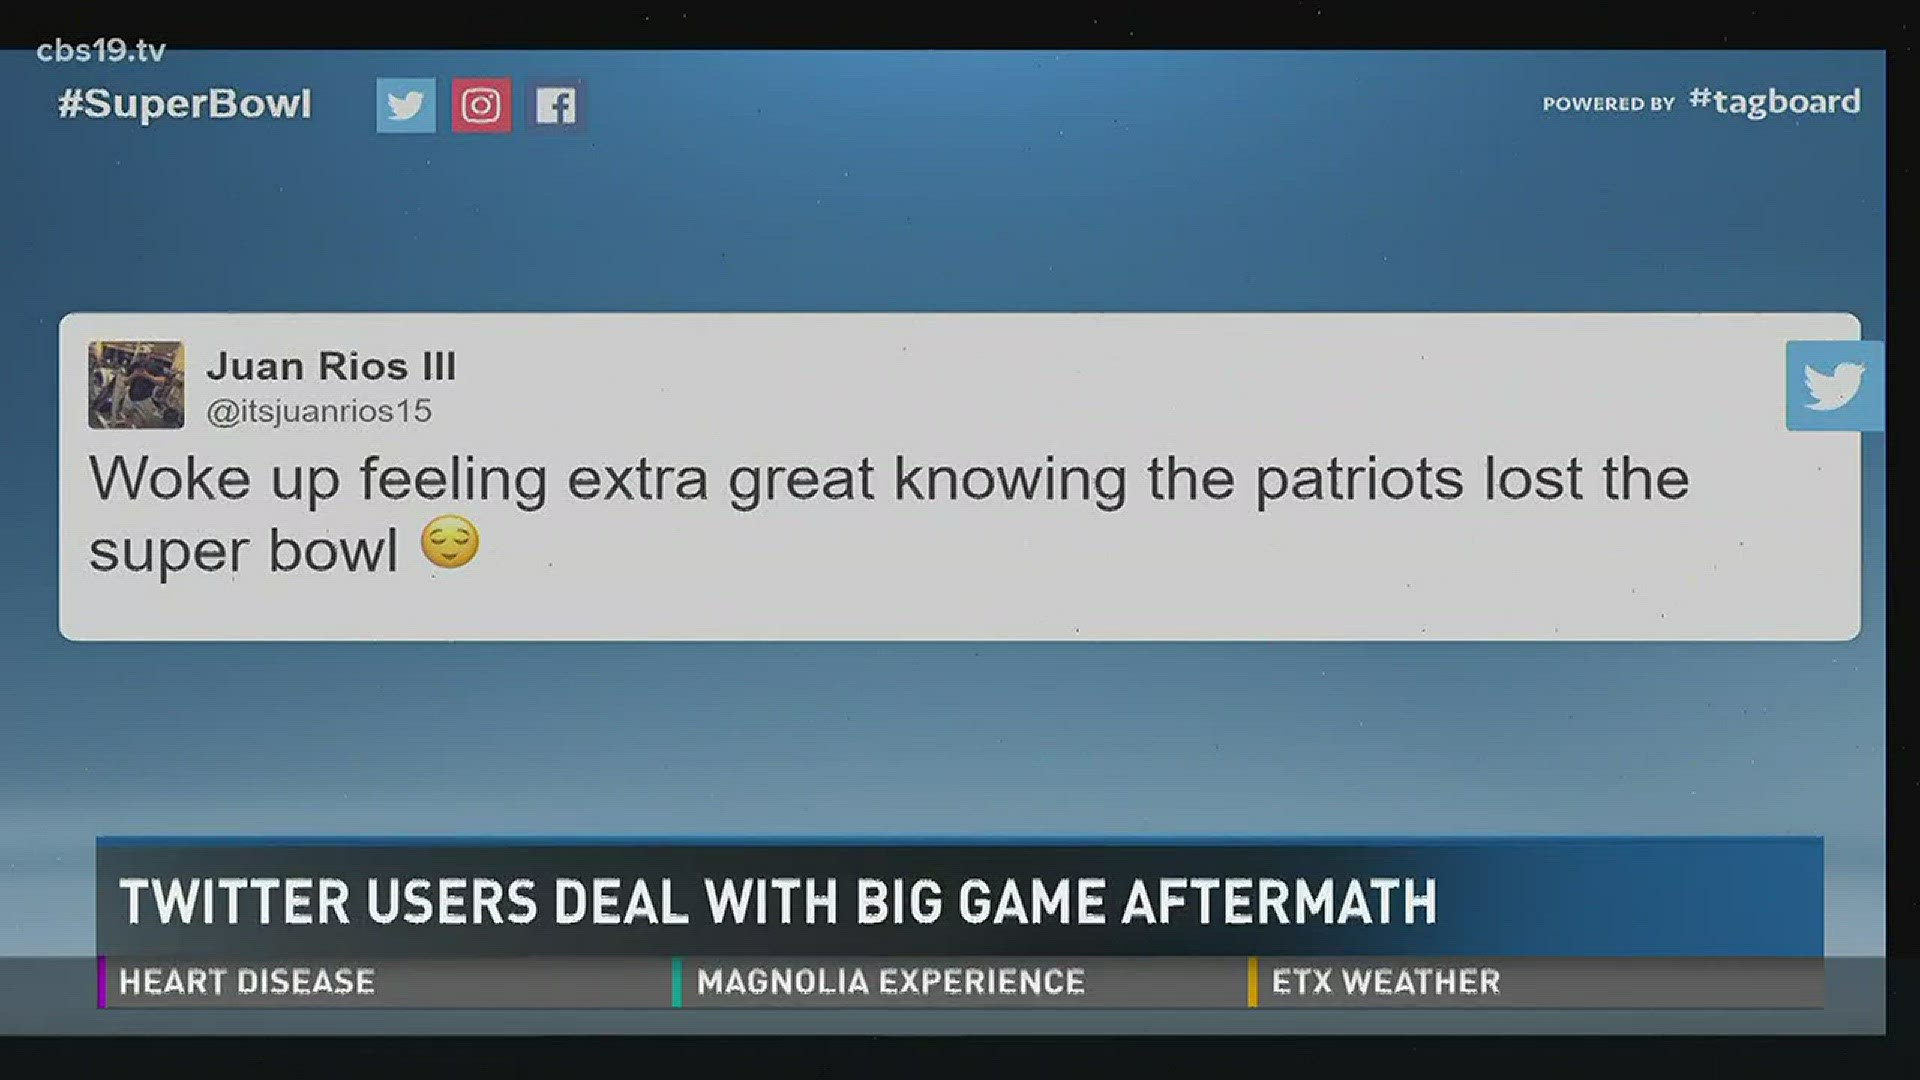 CBS 19 Tagboard: Day after the Super Bowl